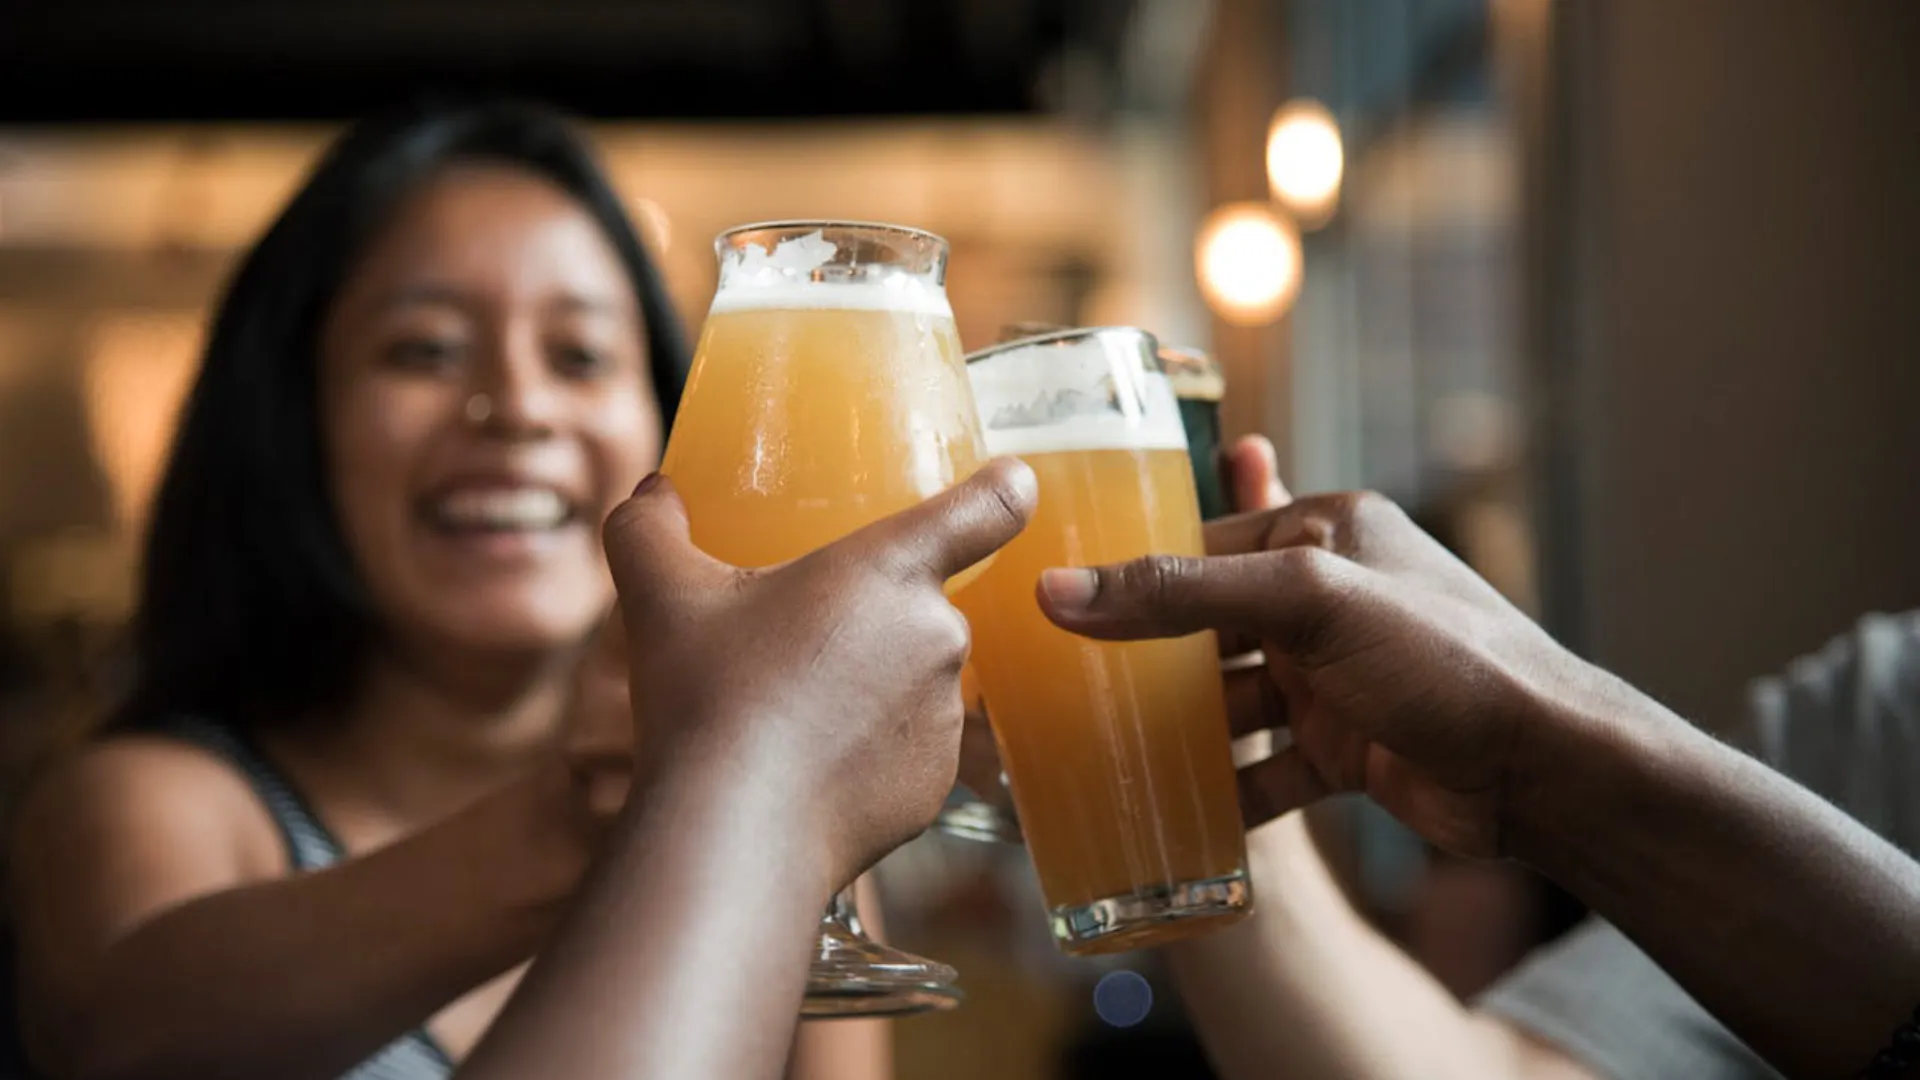 Image of a woman holding a glass of beer